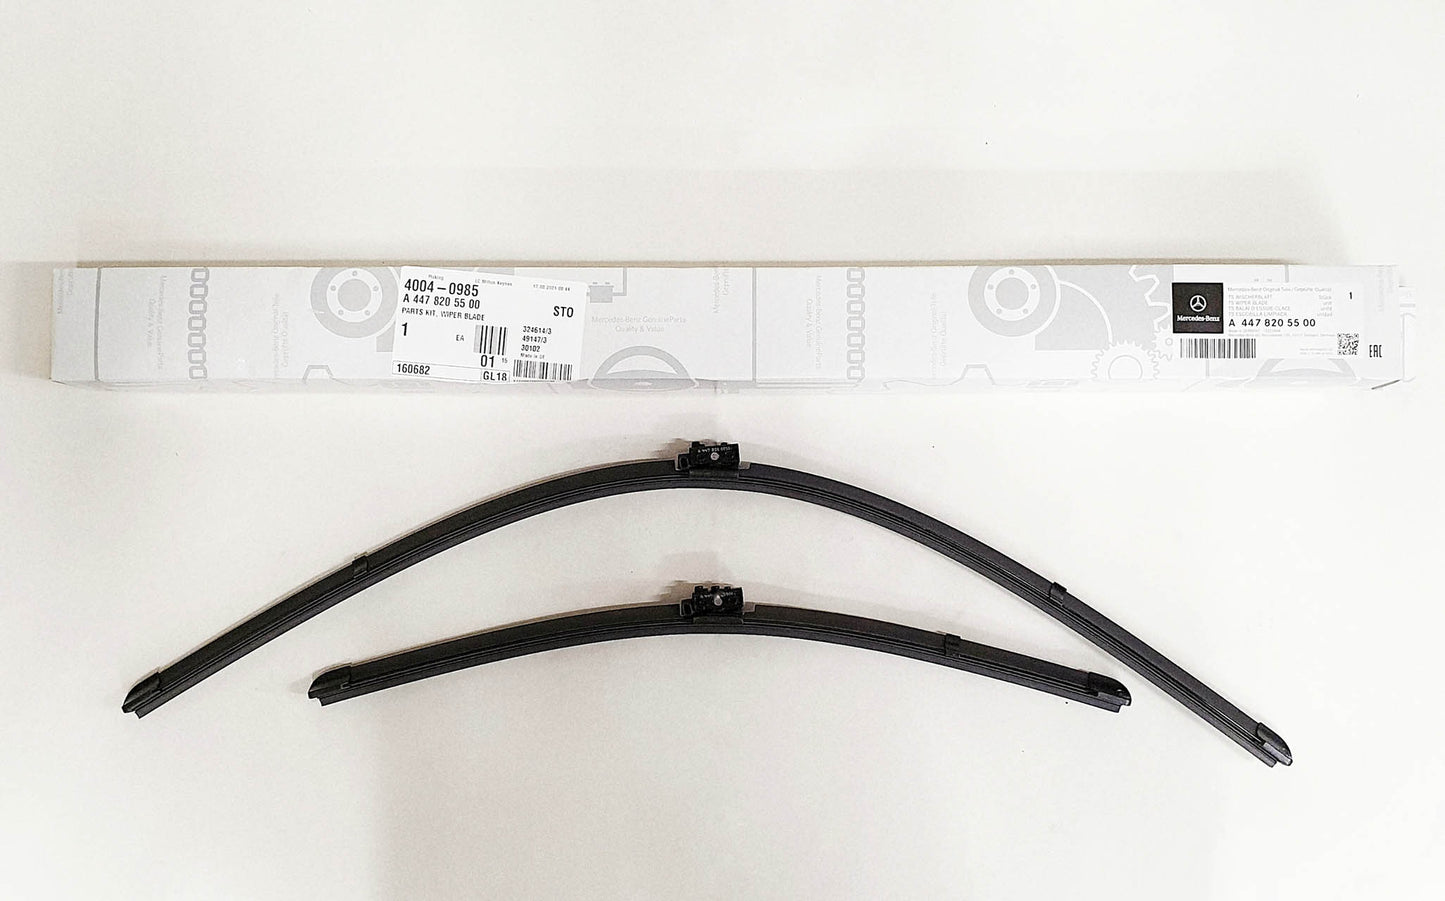 Genuine Mercedes-Benz Vito Front Wiper Blades for 447 models